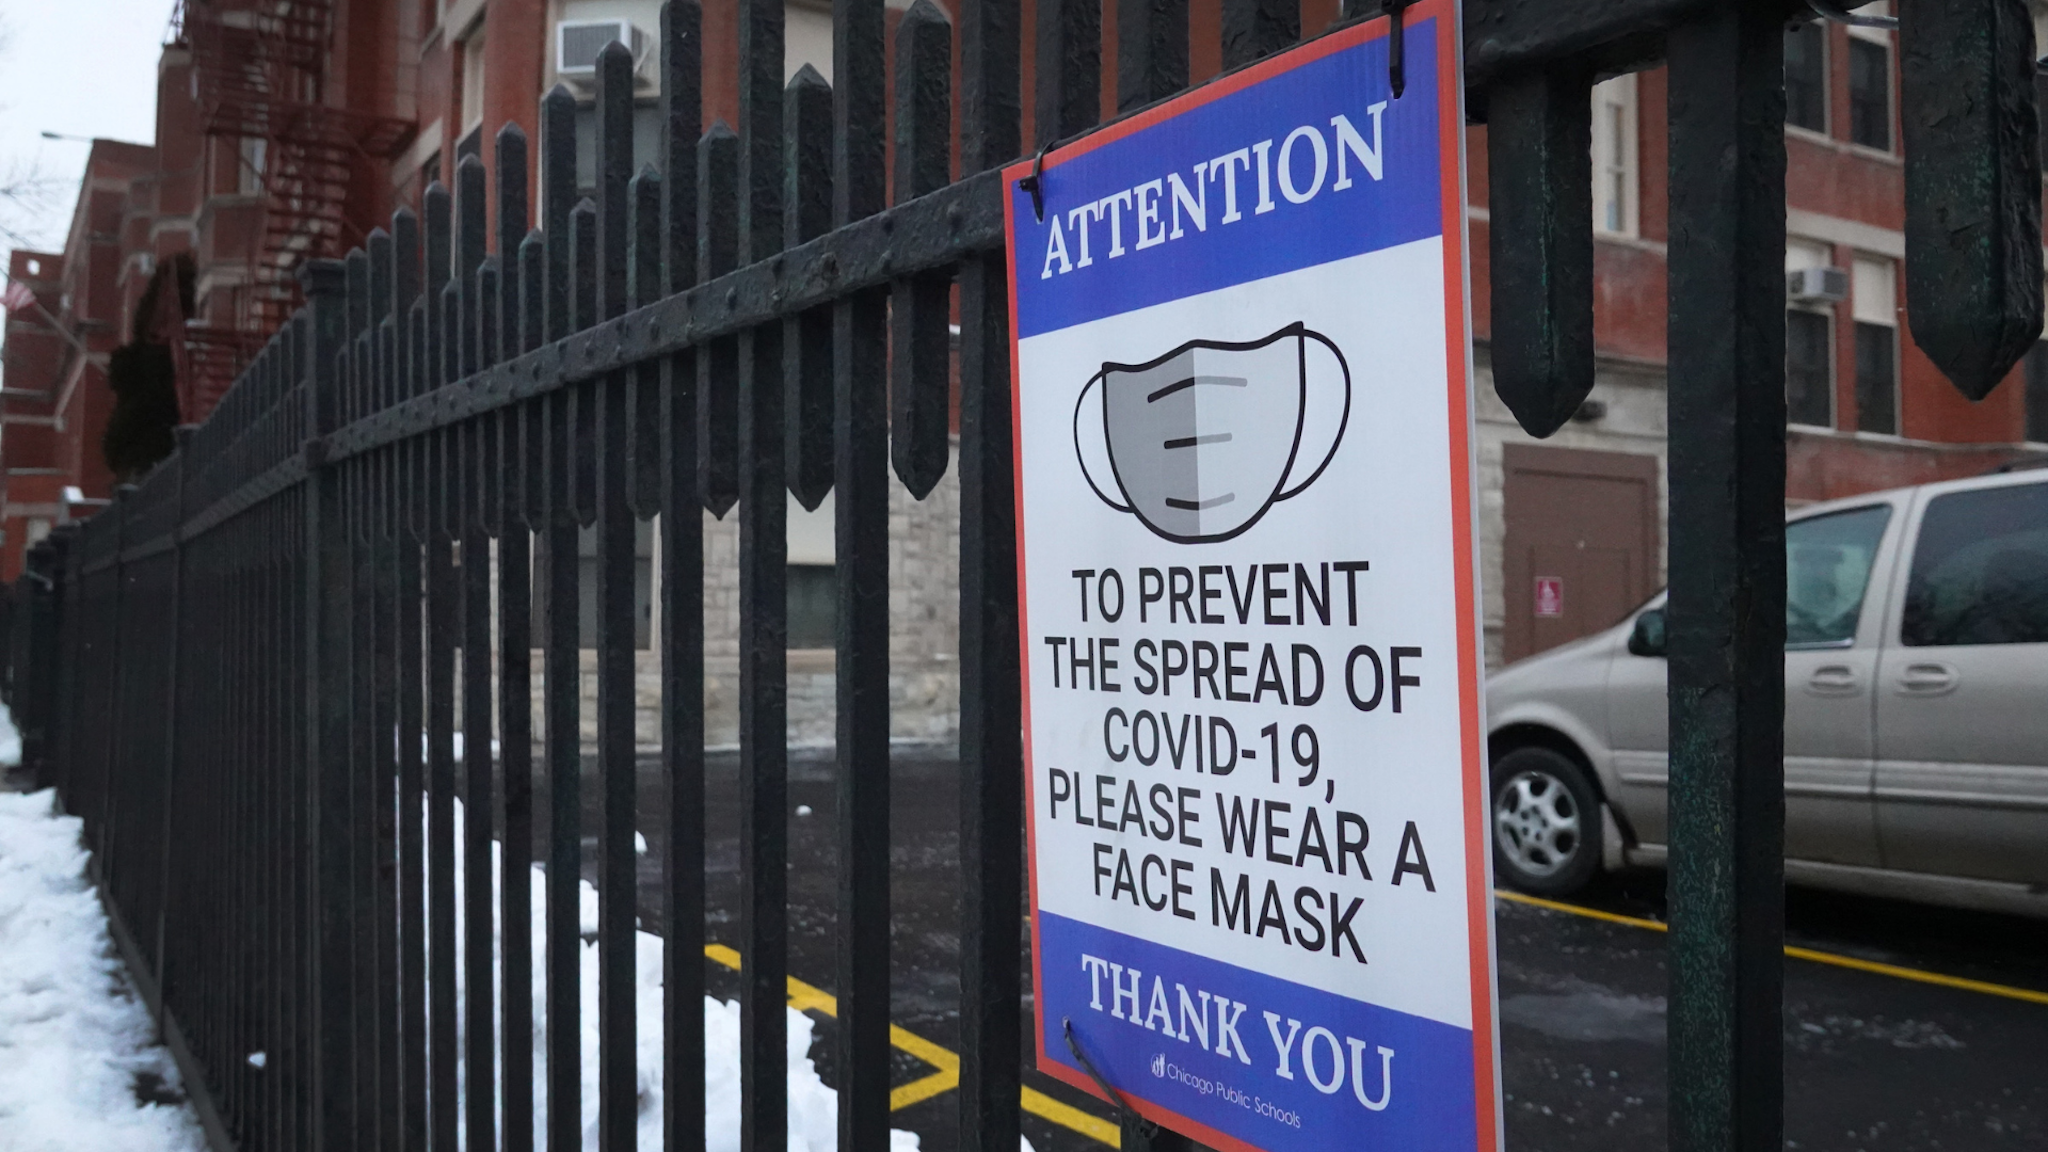 sign on the fence outside of Lowell elementary school asks students, staff and visitors to wear a mask to prevent the spread of COVID-19 on January 05, 2022 in Chicago, Illinois.